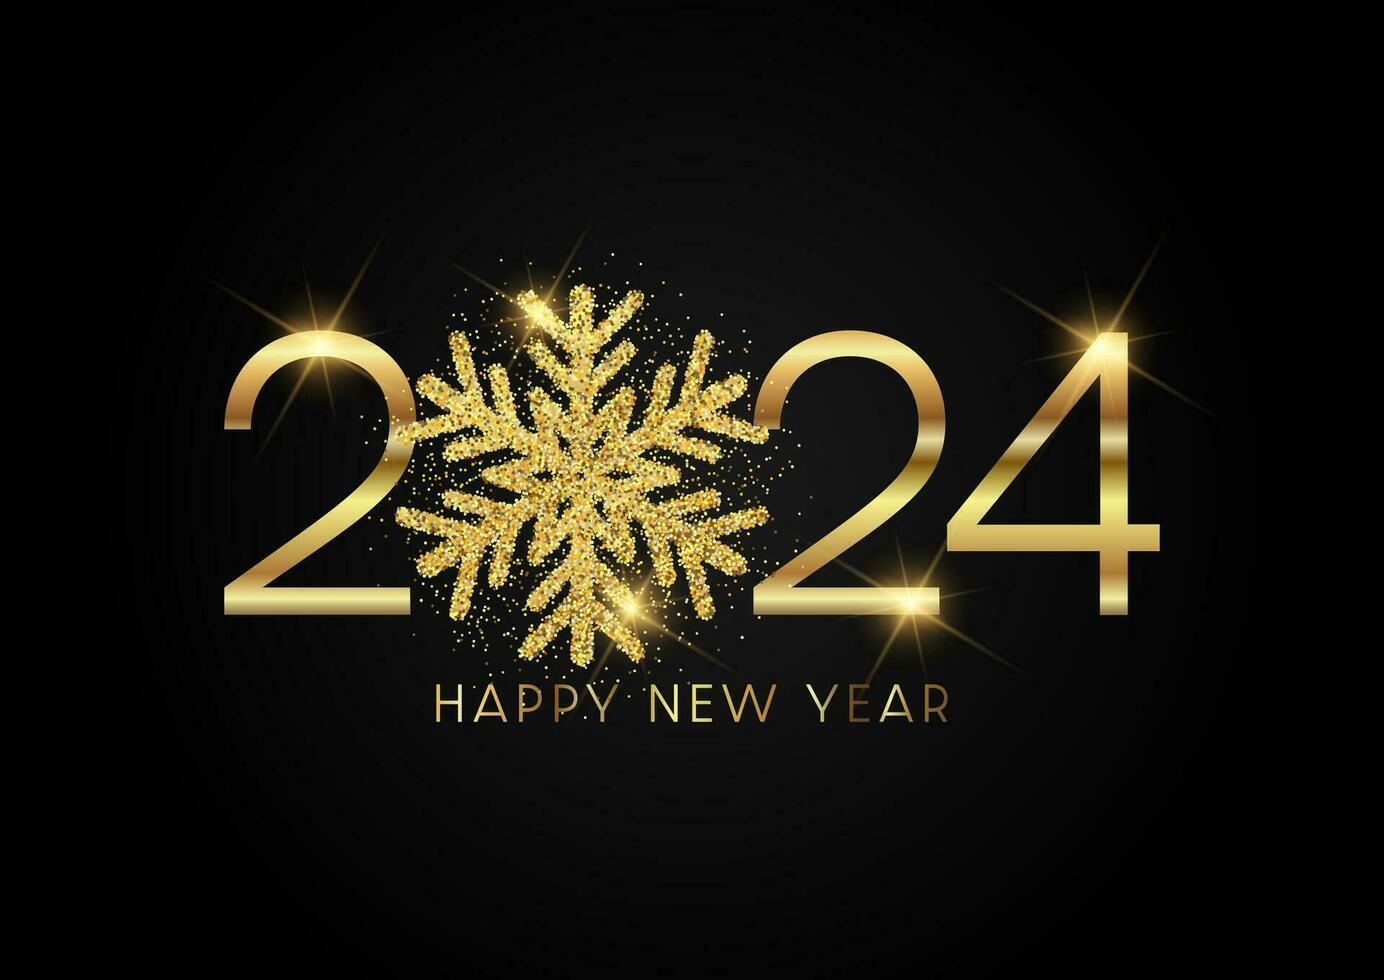 Glittery gold Happy New Year background vector